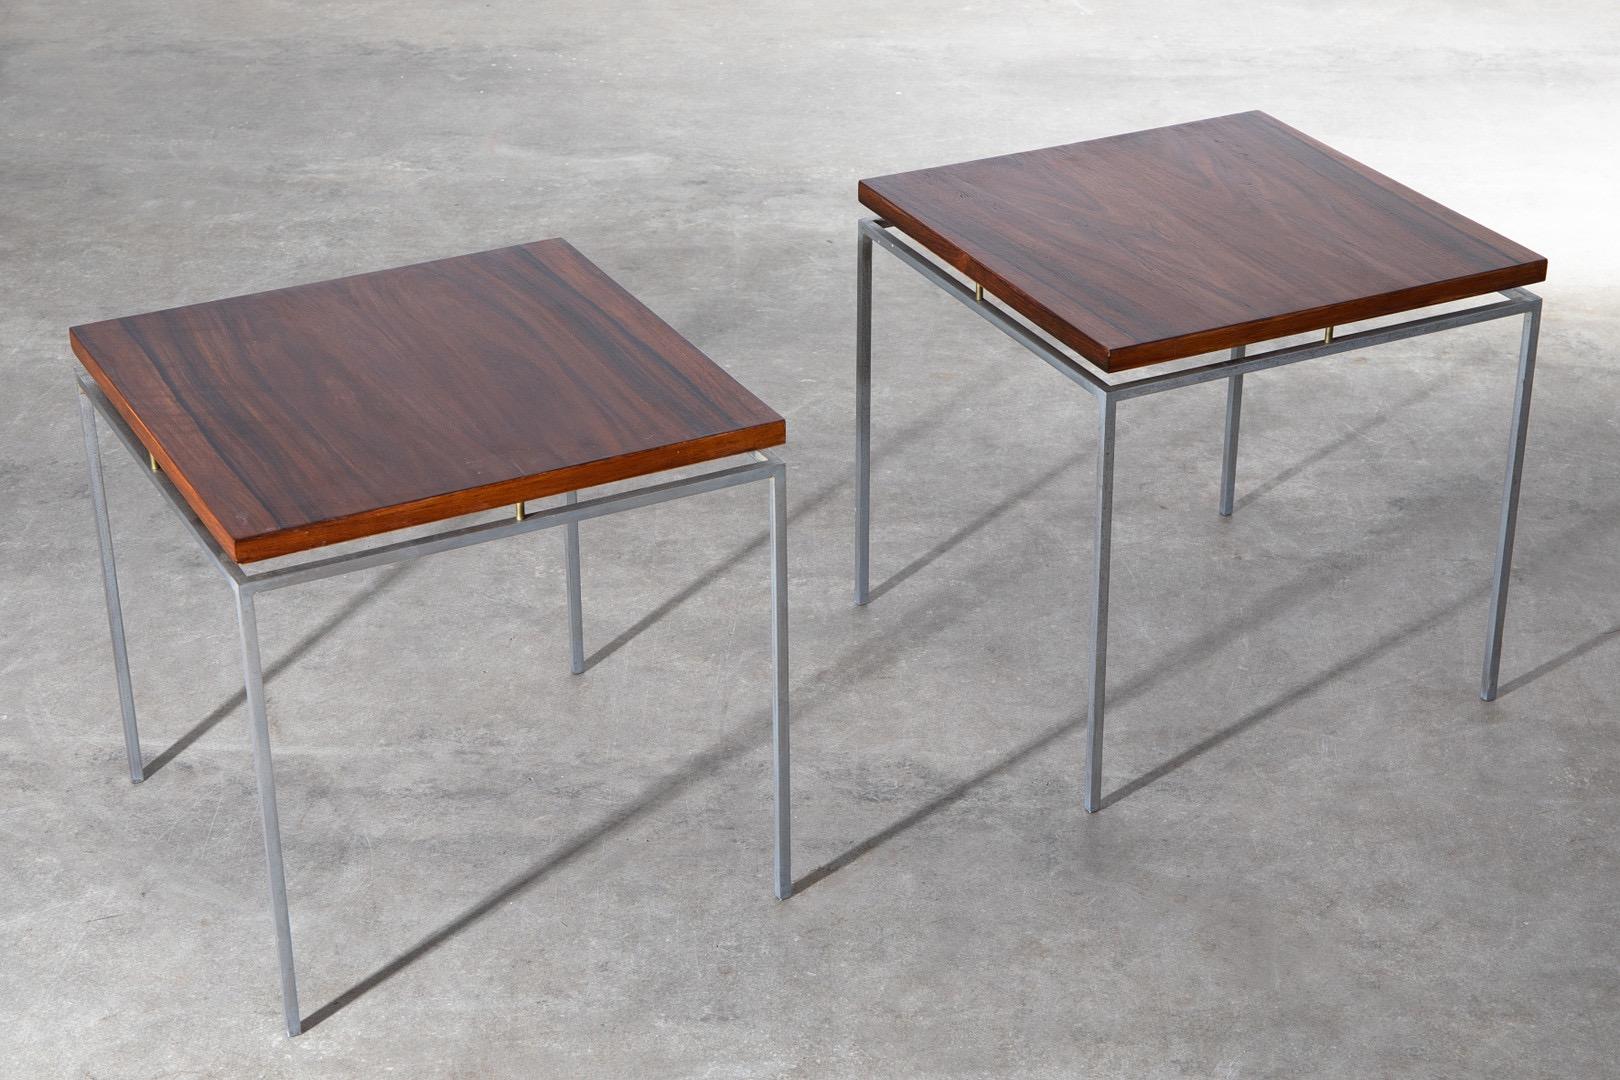 Beautifully crafted yet functional, this pair of Knud Joos side tables model 600, made by Jason Möbler, is sure to elevate your home decor to the next level. The Joos side tables are an iconic representation of Danish mid-century modern